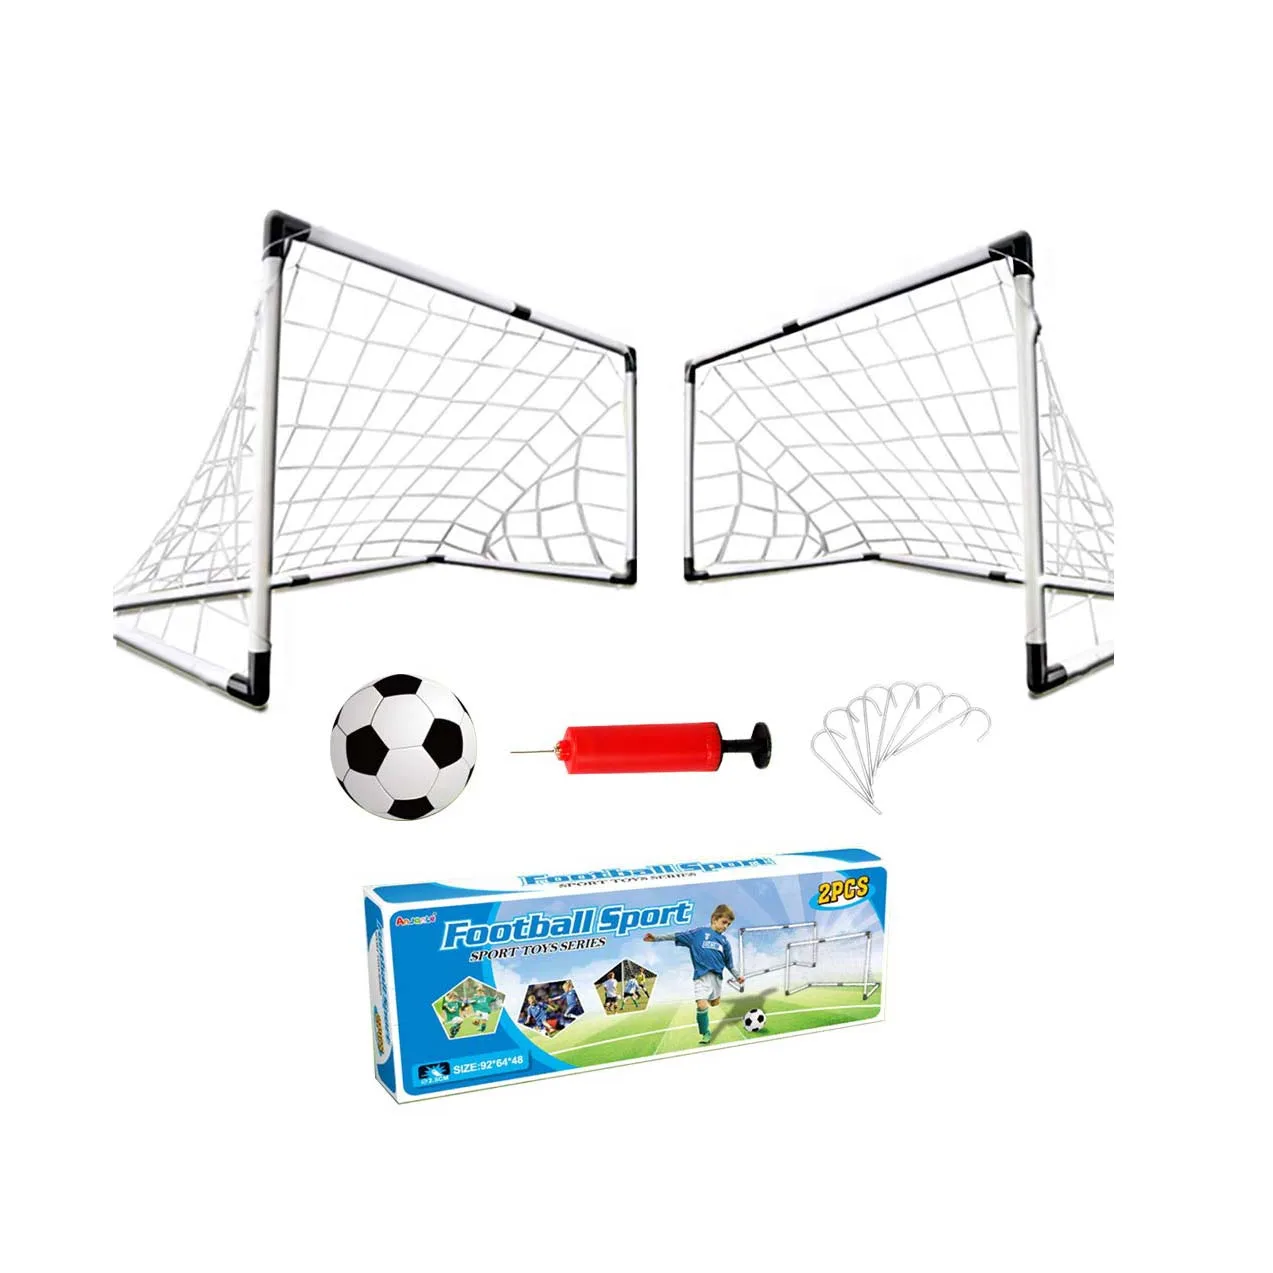 Shuxinmd Football Goal Net Kids Toys Football Training Sports Durable with Soccer Ball and Pump Travel and Backyard Play Toys for Children